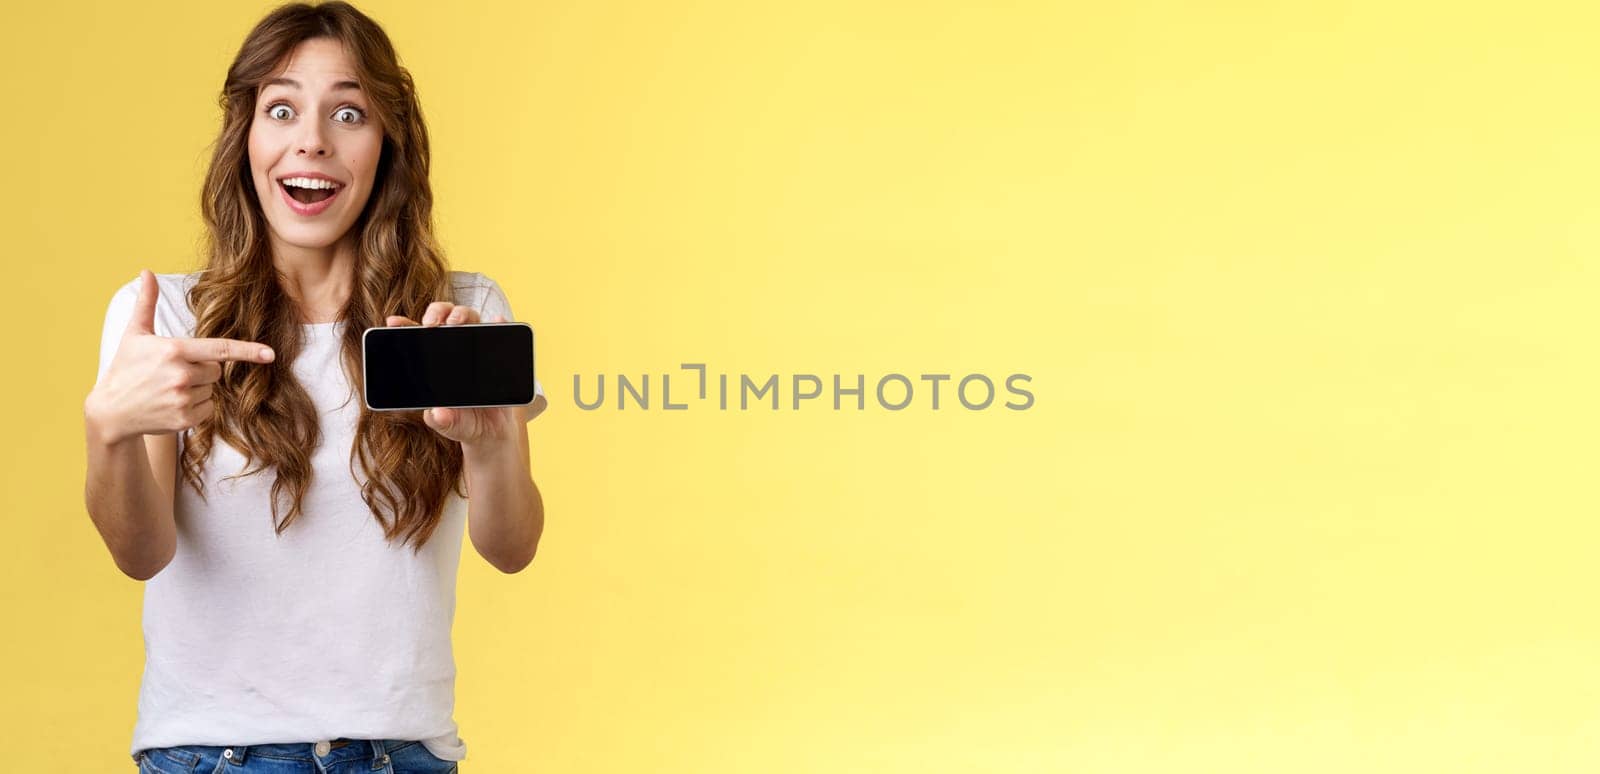 Impressed upbeat happy lucky girl curly long hairstyle open mouth admiration joy like awesome new app show smartphone screen horizontal phone display stand yellow background amazed. Lifestyle.